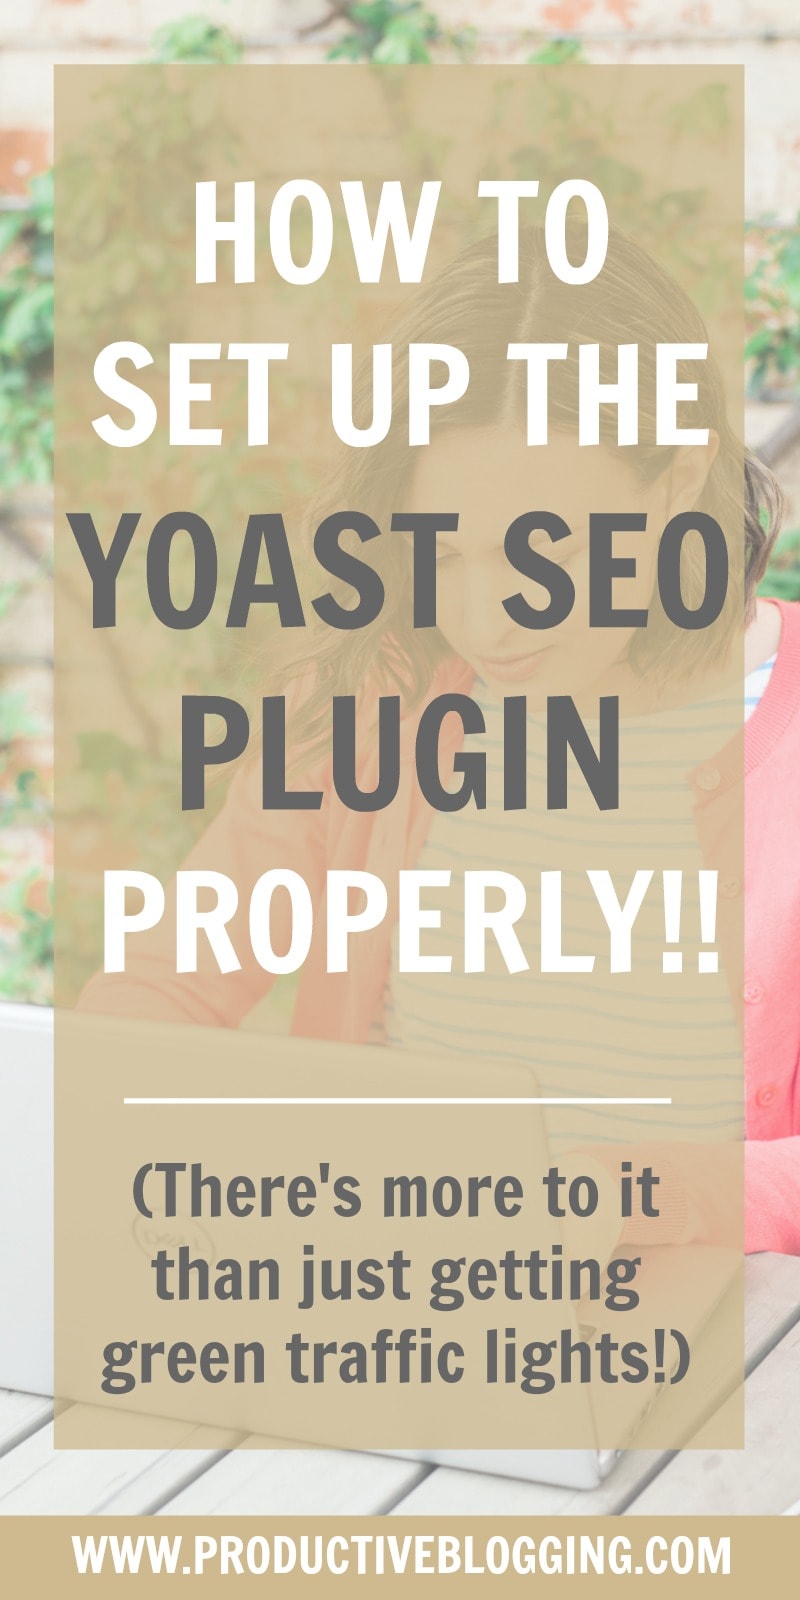 If you have a WordPress blog it’s likely you have the Yoast SEO plugin – but do you have it set up properly? In this tutorial I’ll show you exactly how to set up the Yoast SEO plugin so you get the maximum benefit from it. #yoast #wordpress #wordpressblog #wordpressplugins #wordpresstips #blogging #bloggingtips #seotips #seohacks #yoastseoplugin #yoastplugin #yoasttips #searchengineoptimization #growyourblog #bloggrowth #bloggrowthhacks #productiveblogging 